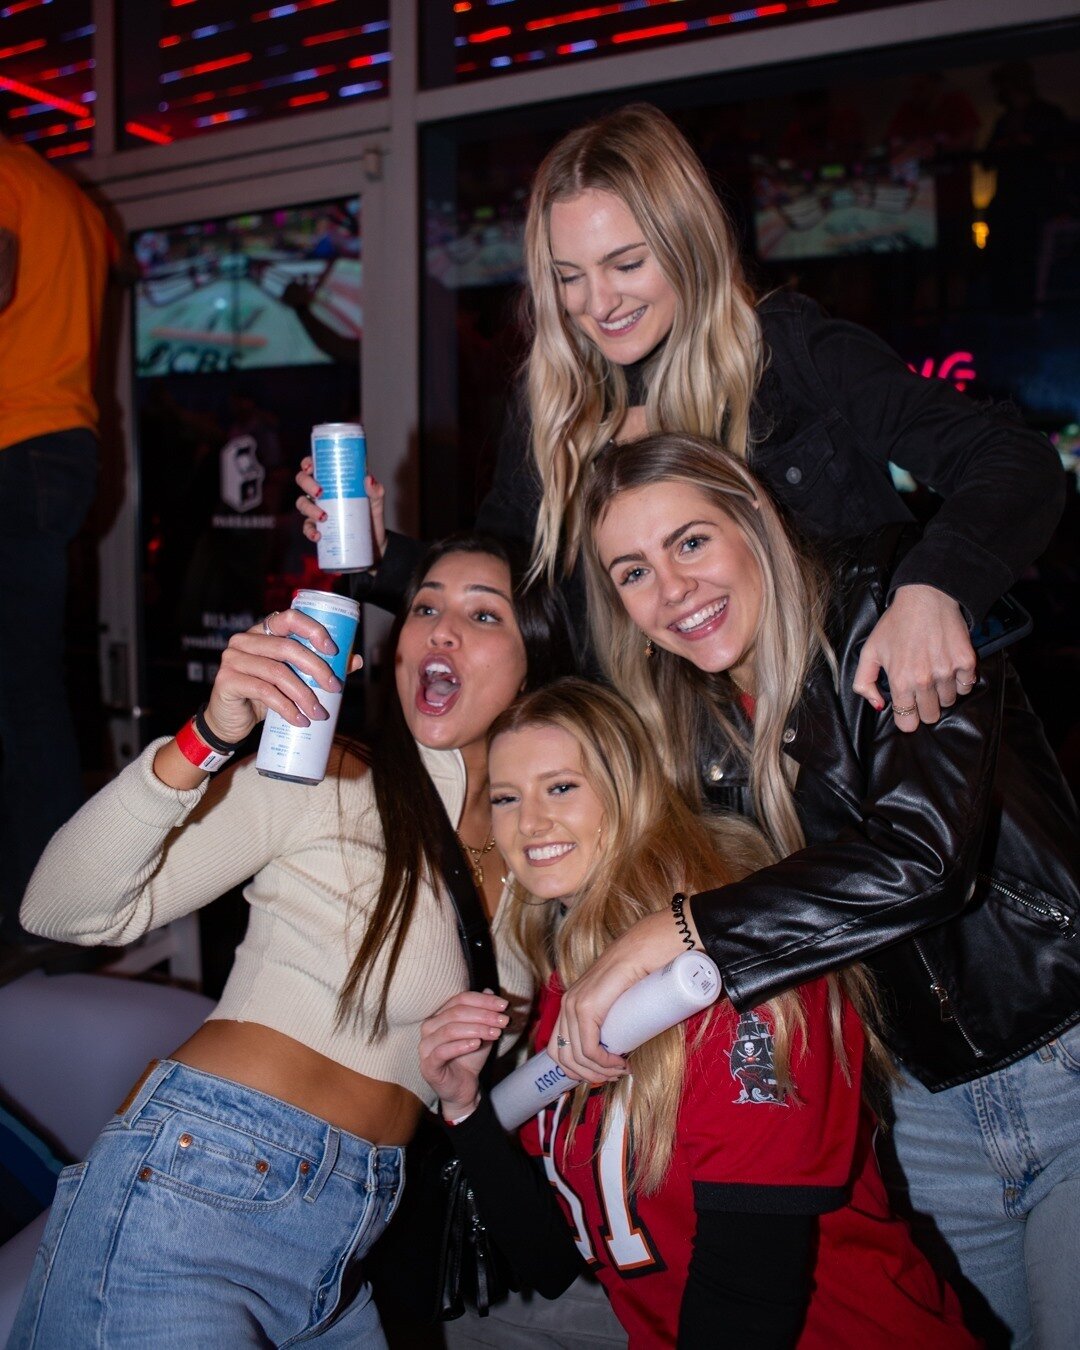 Friday might be date night, but Thursday's for the girls! 🎉🎶🍾⁠
$4 High Noons &amp; White Tea Shots | $6 Goose &amp; Red Bull | $10 Goose, Bacardi &amp; Cazadores Liquor Pitchers | $100 select bottles | sounds by @giuseppetheDJ #ParkRecTPA #GNO